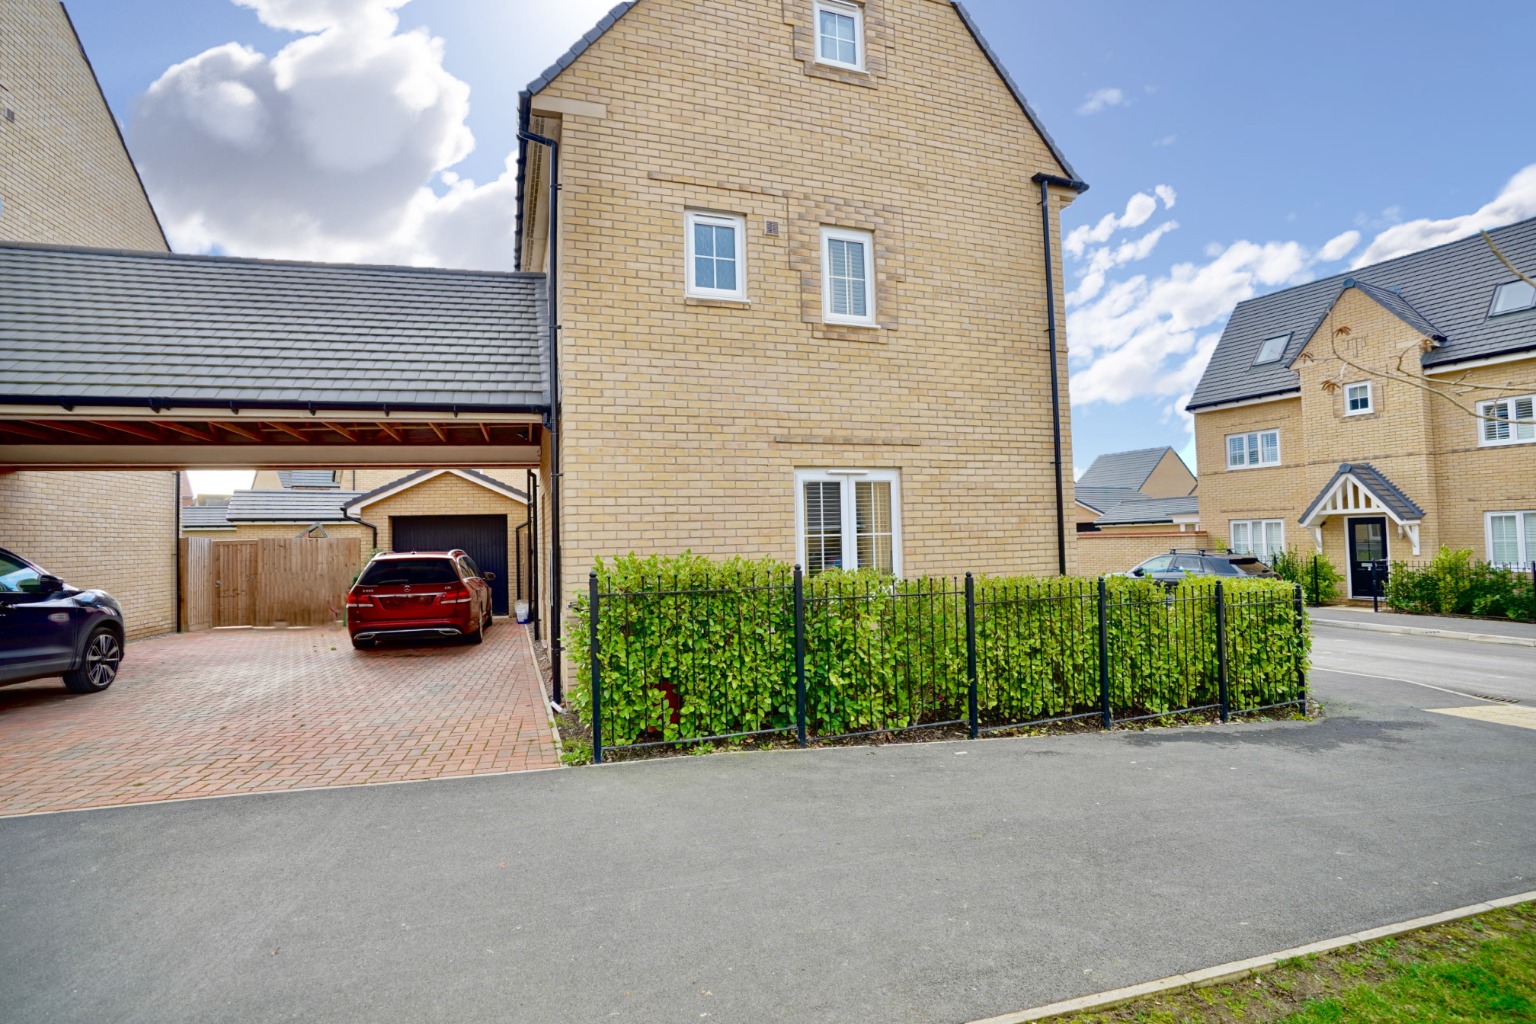 4 bed link detached house for sale in Innkeeper Way, Huntingdon 9